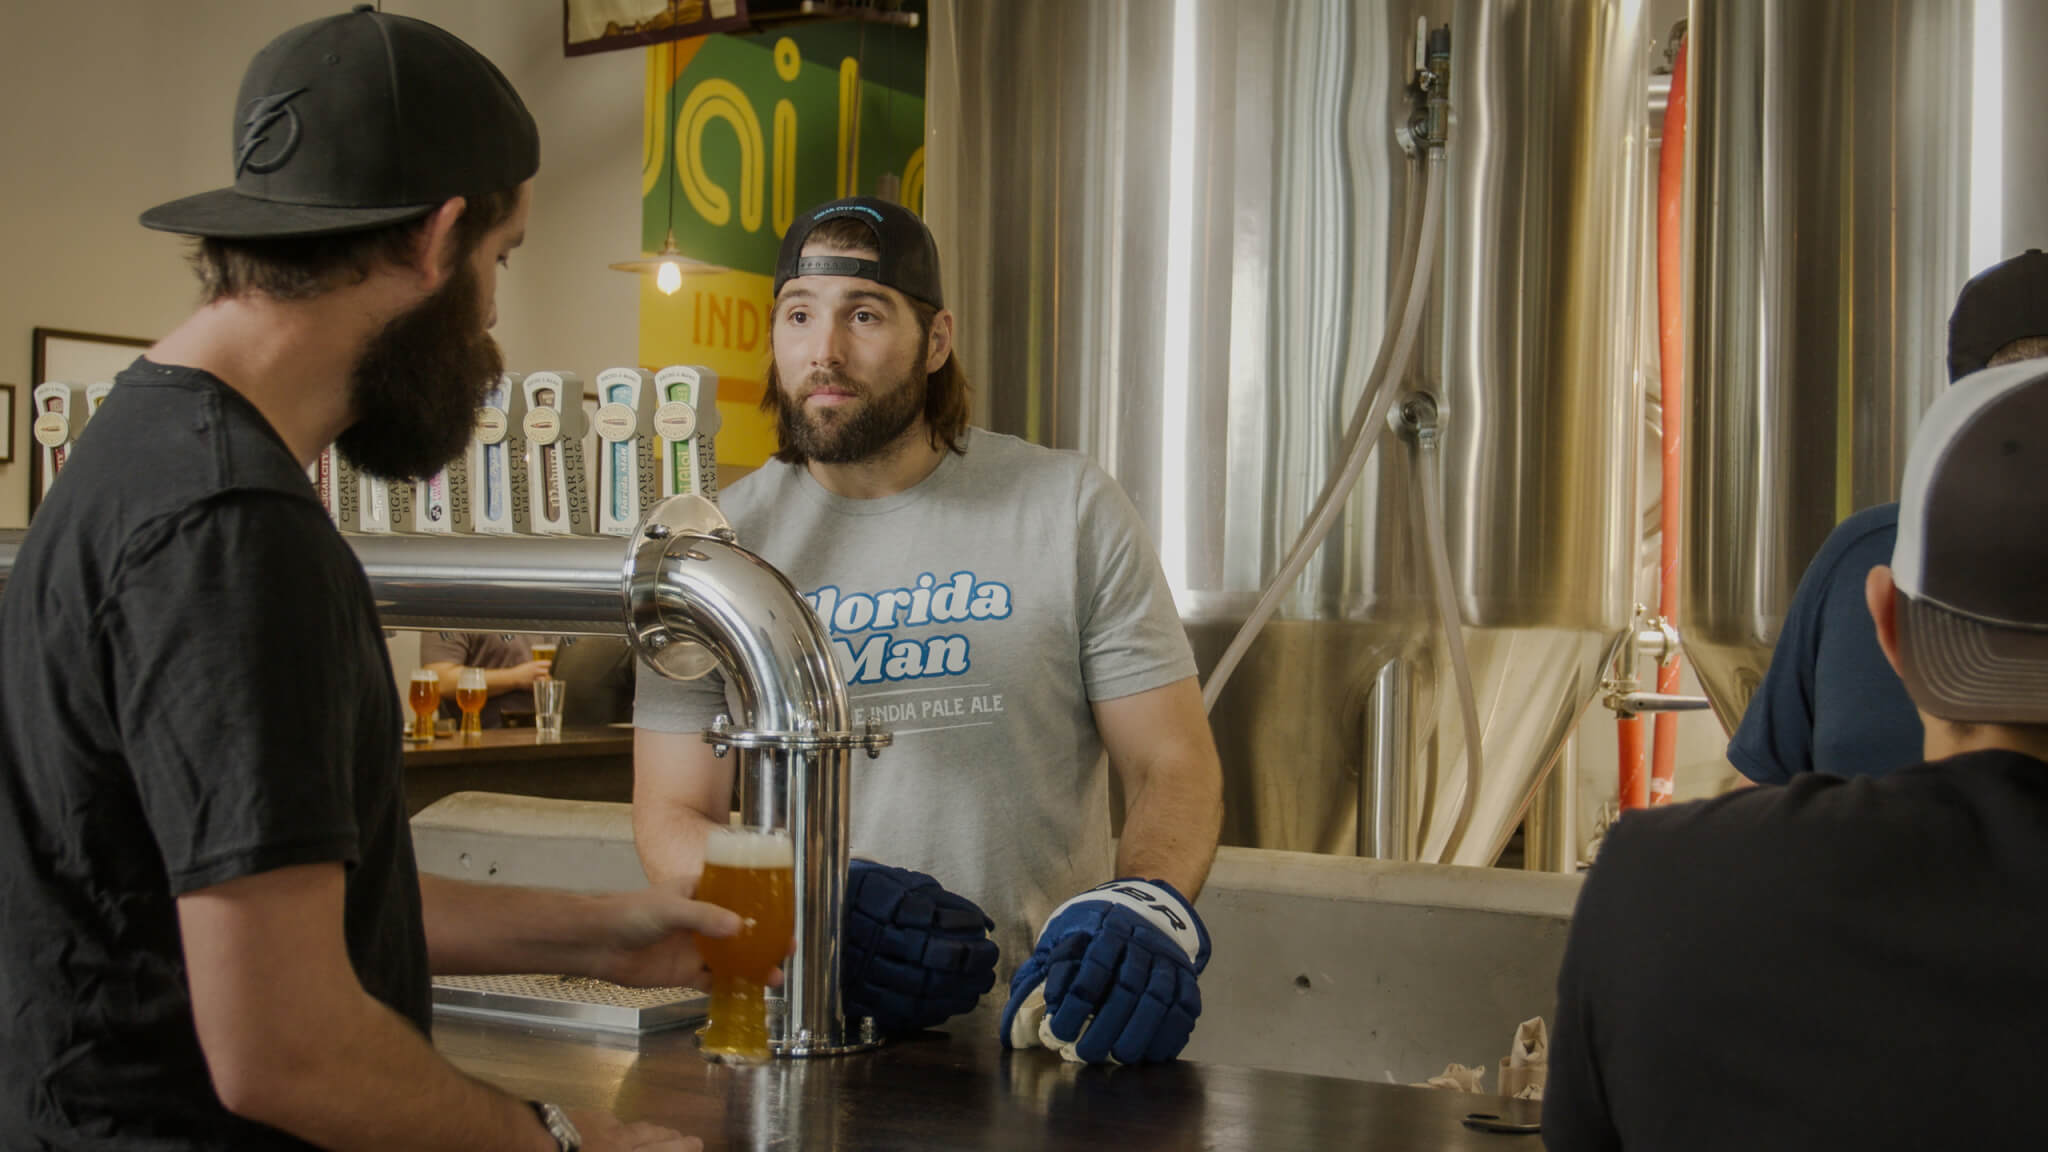 Tampa Bay Lightning's Pat Maroon attempts to open a can of Florida Man Double IPA while working on the canning line at Cigar City Brewing's Spruce Street brewery while a CCB staff member watches.